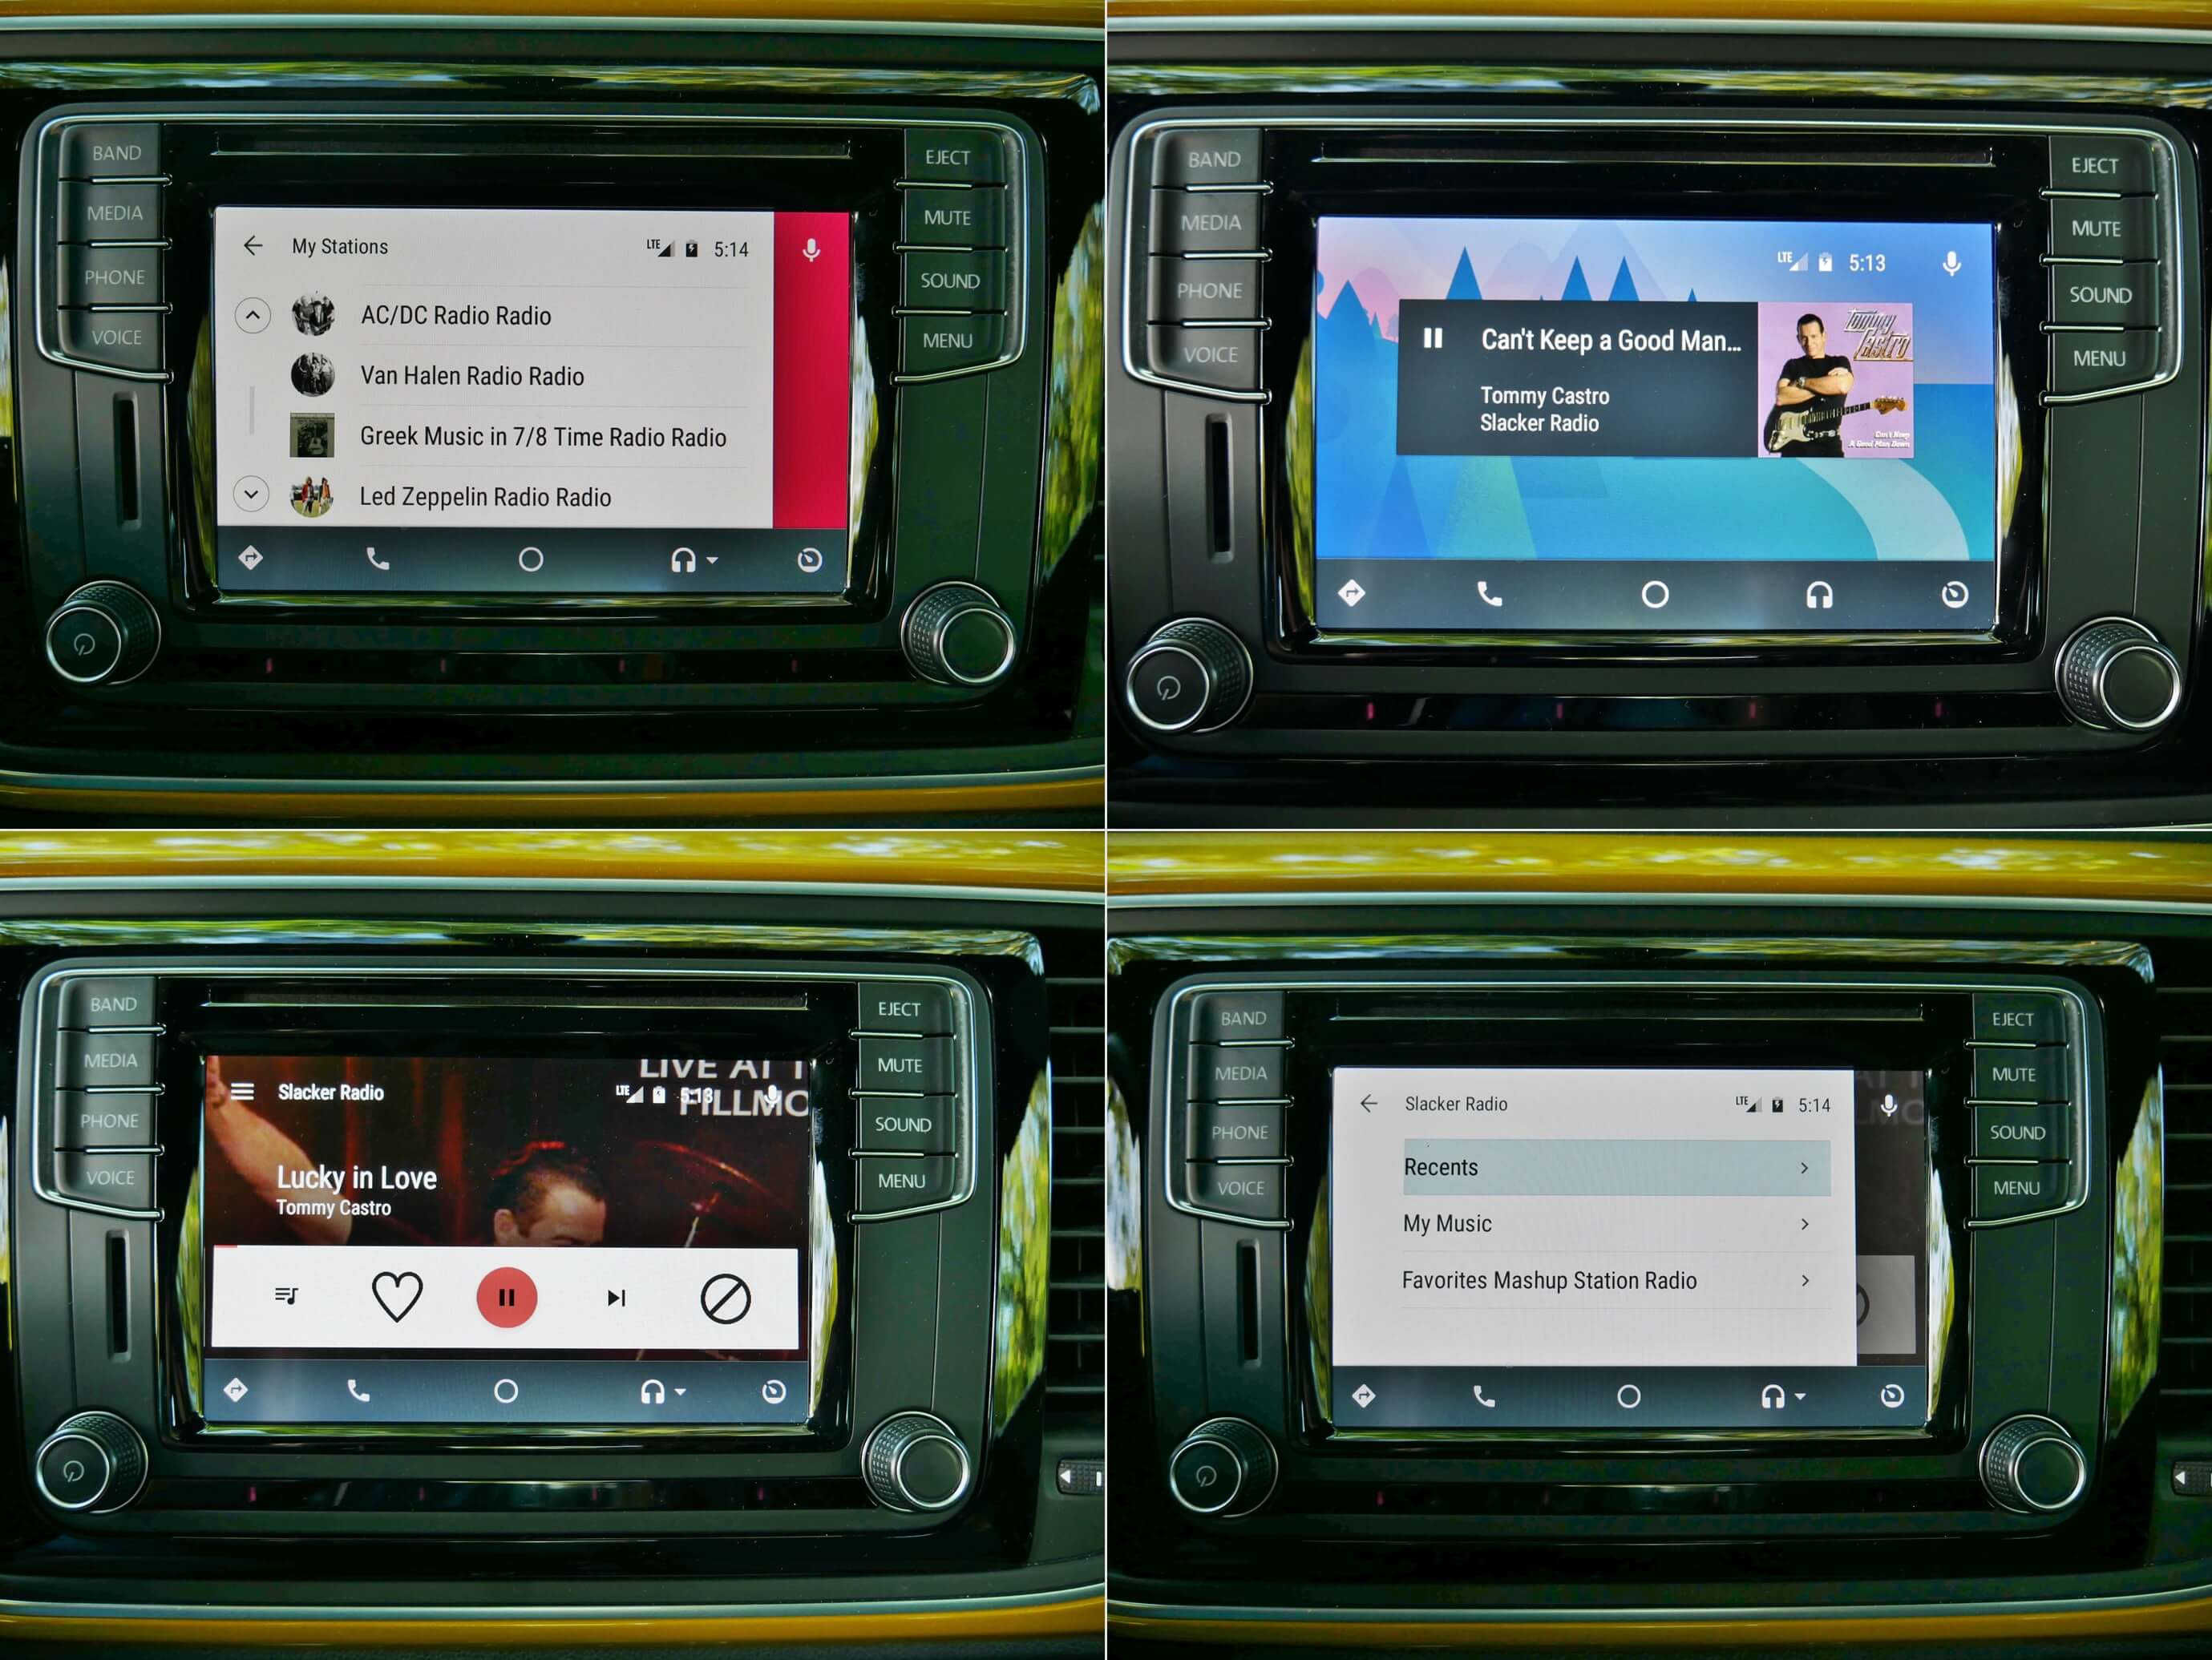 2017 Volkswagen Beetle Dune: Slacker Radio is one of 4 free subscription streaming broadcast music apps included w/ Android Auto